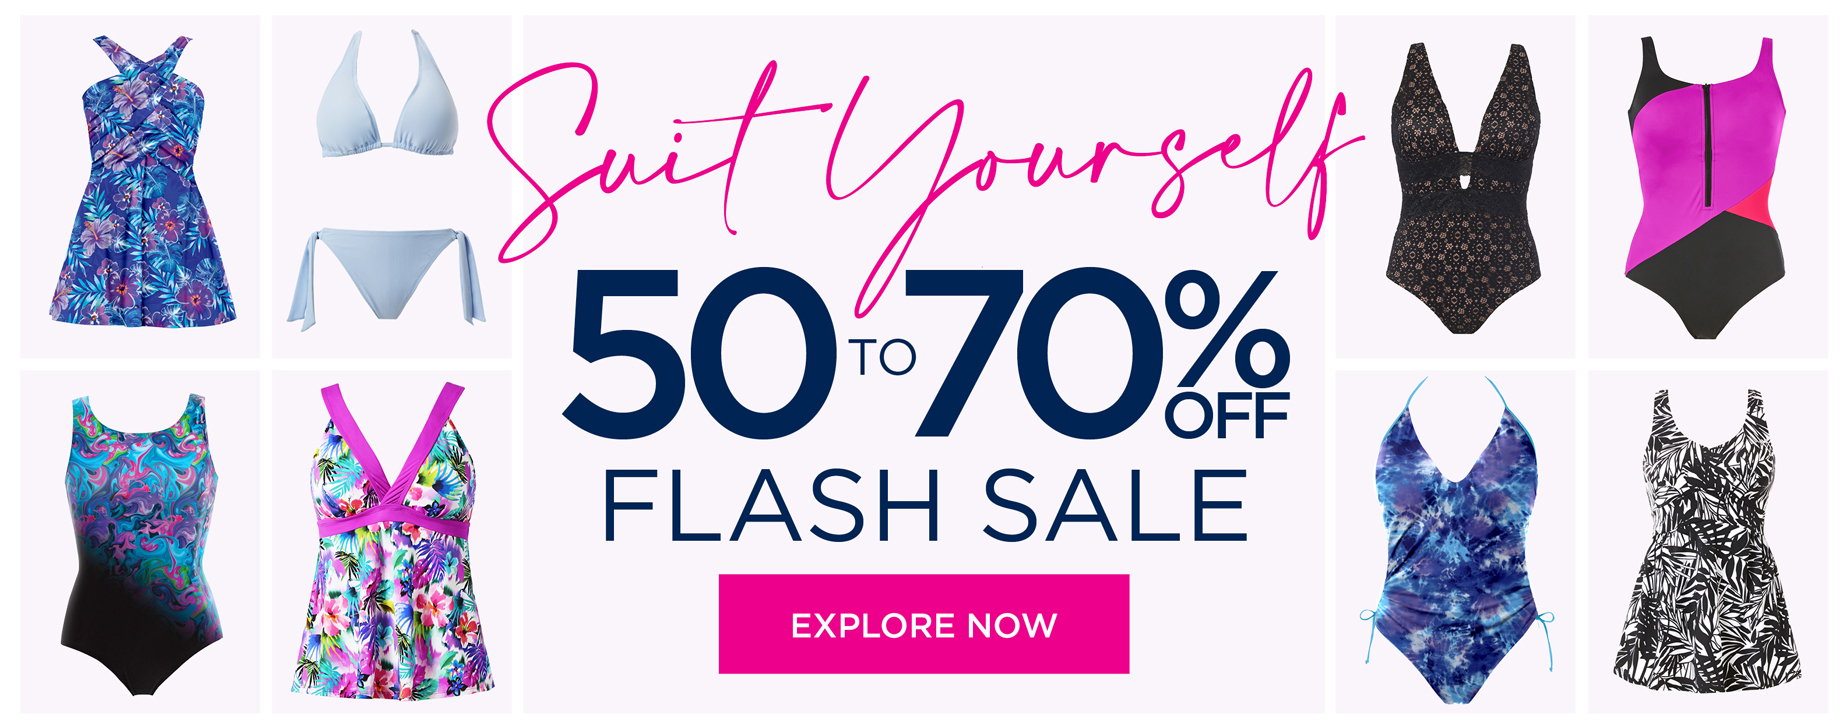 SUIT YOURSELF - 50 to 70% OFF FLASH SALE